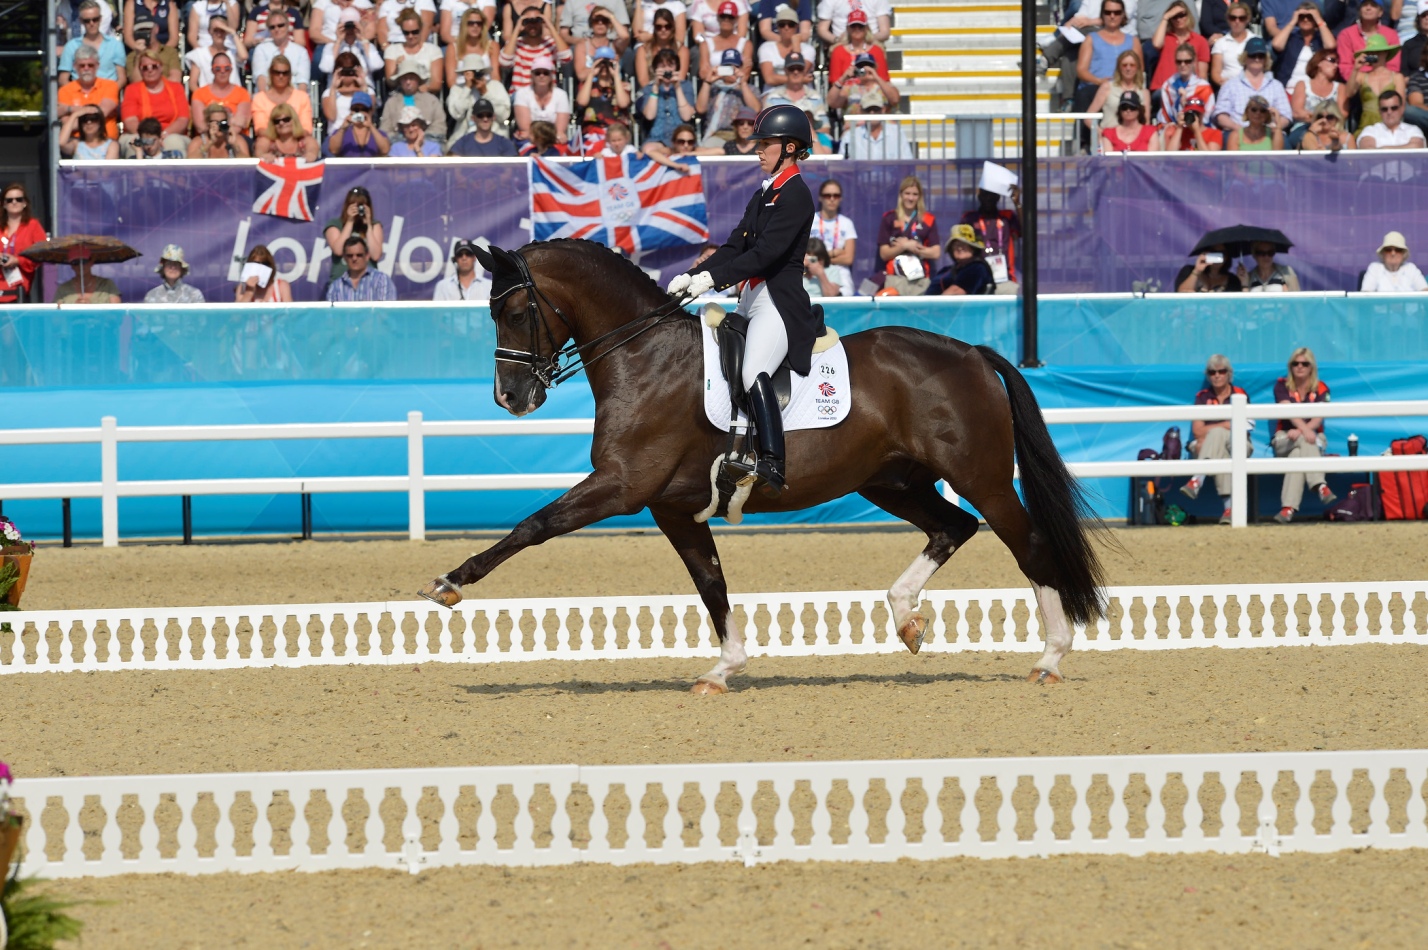 Dujardin becomes first Briton to lead Rankings